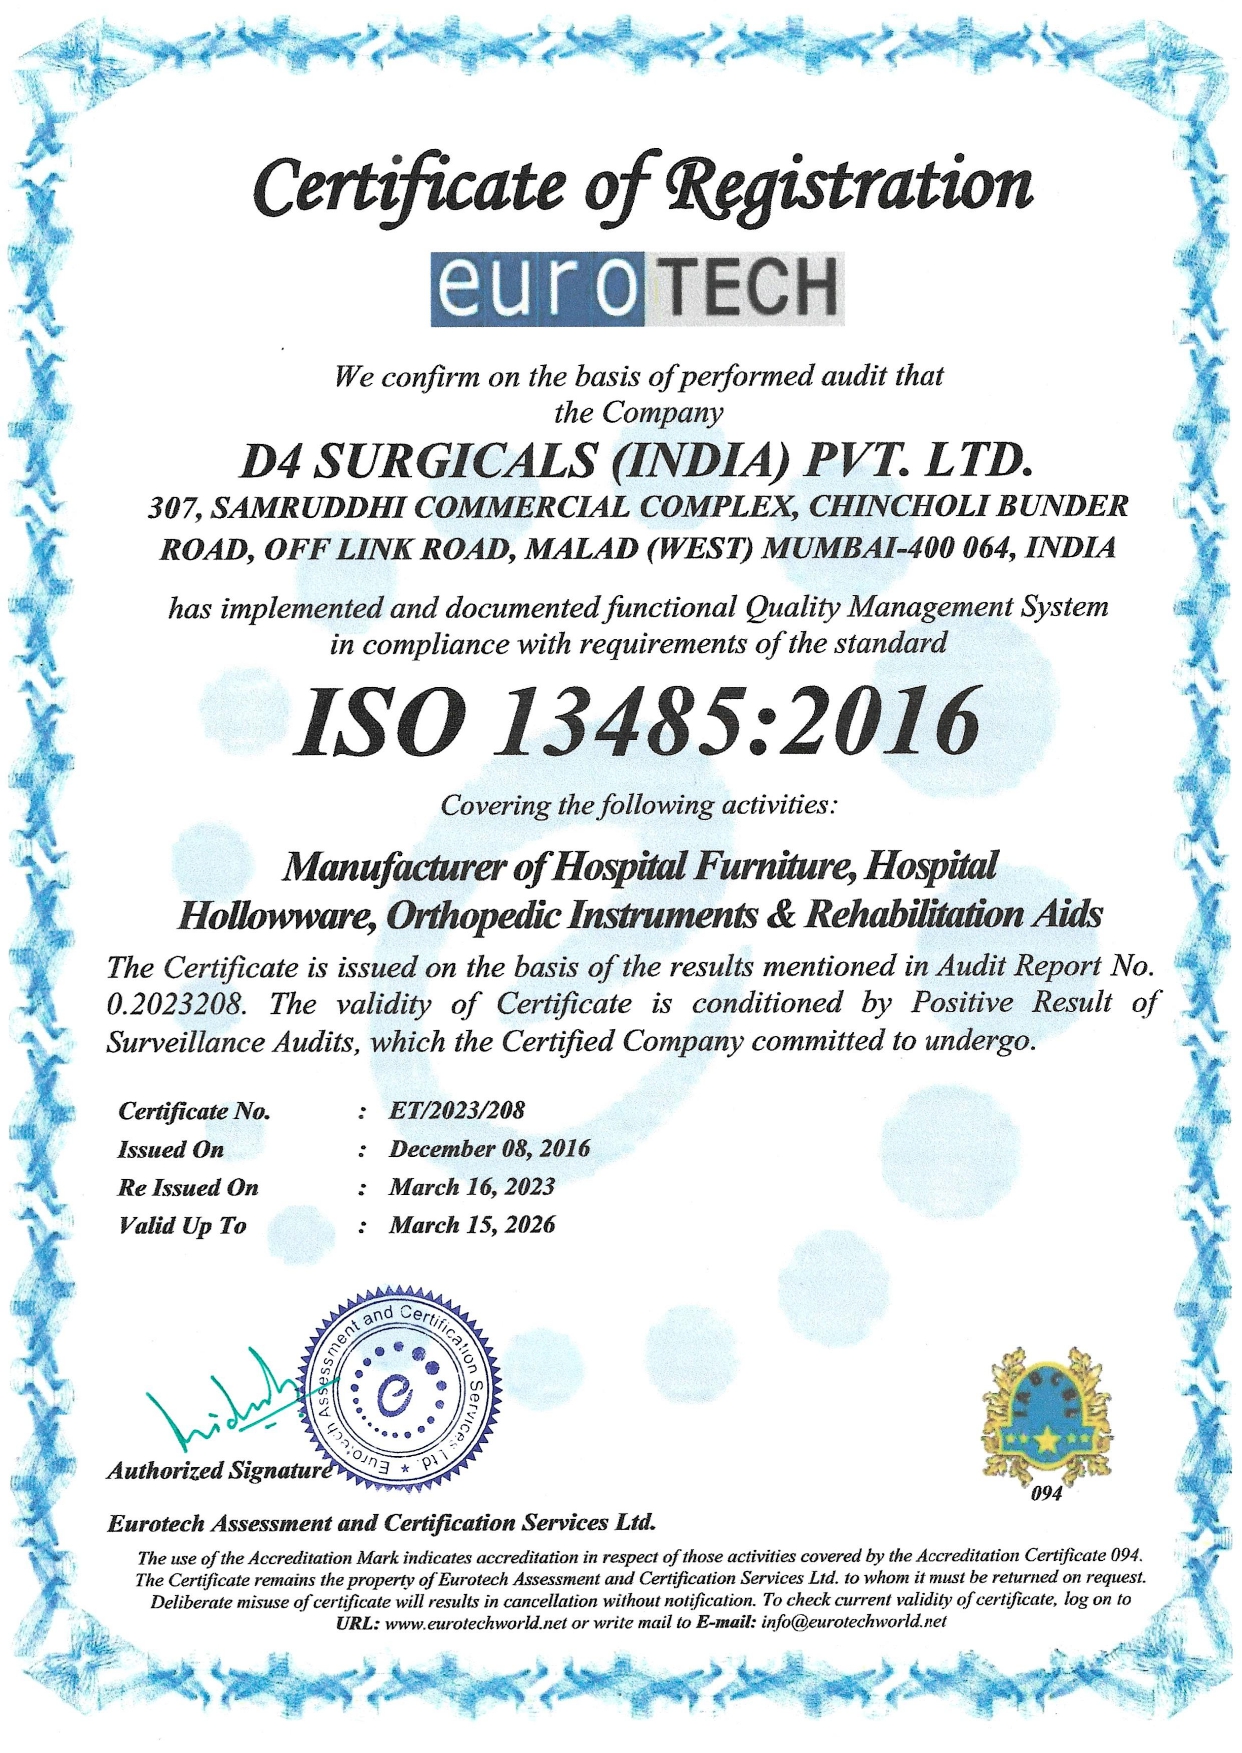 ISO 13485-2016